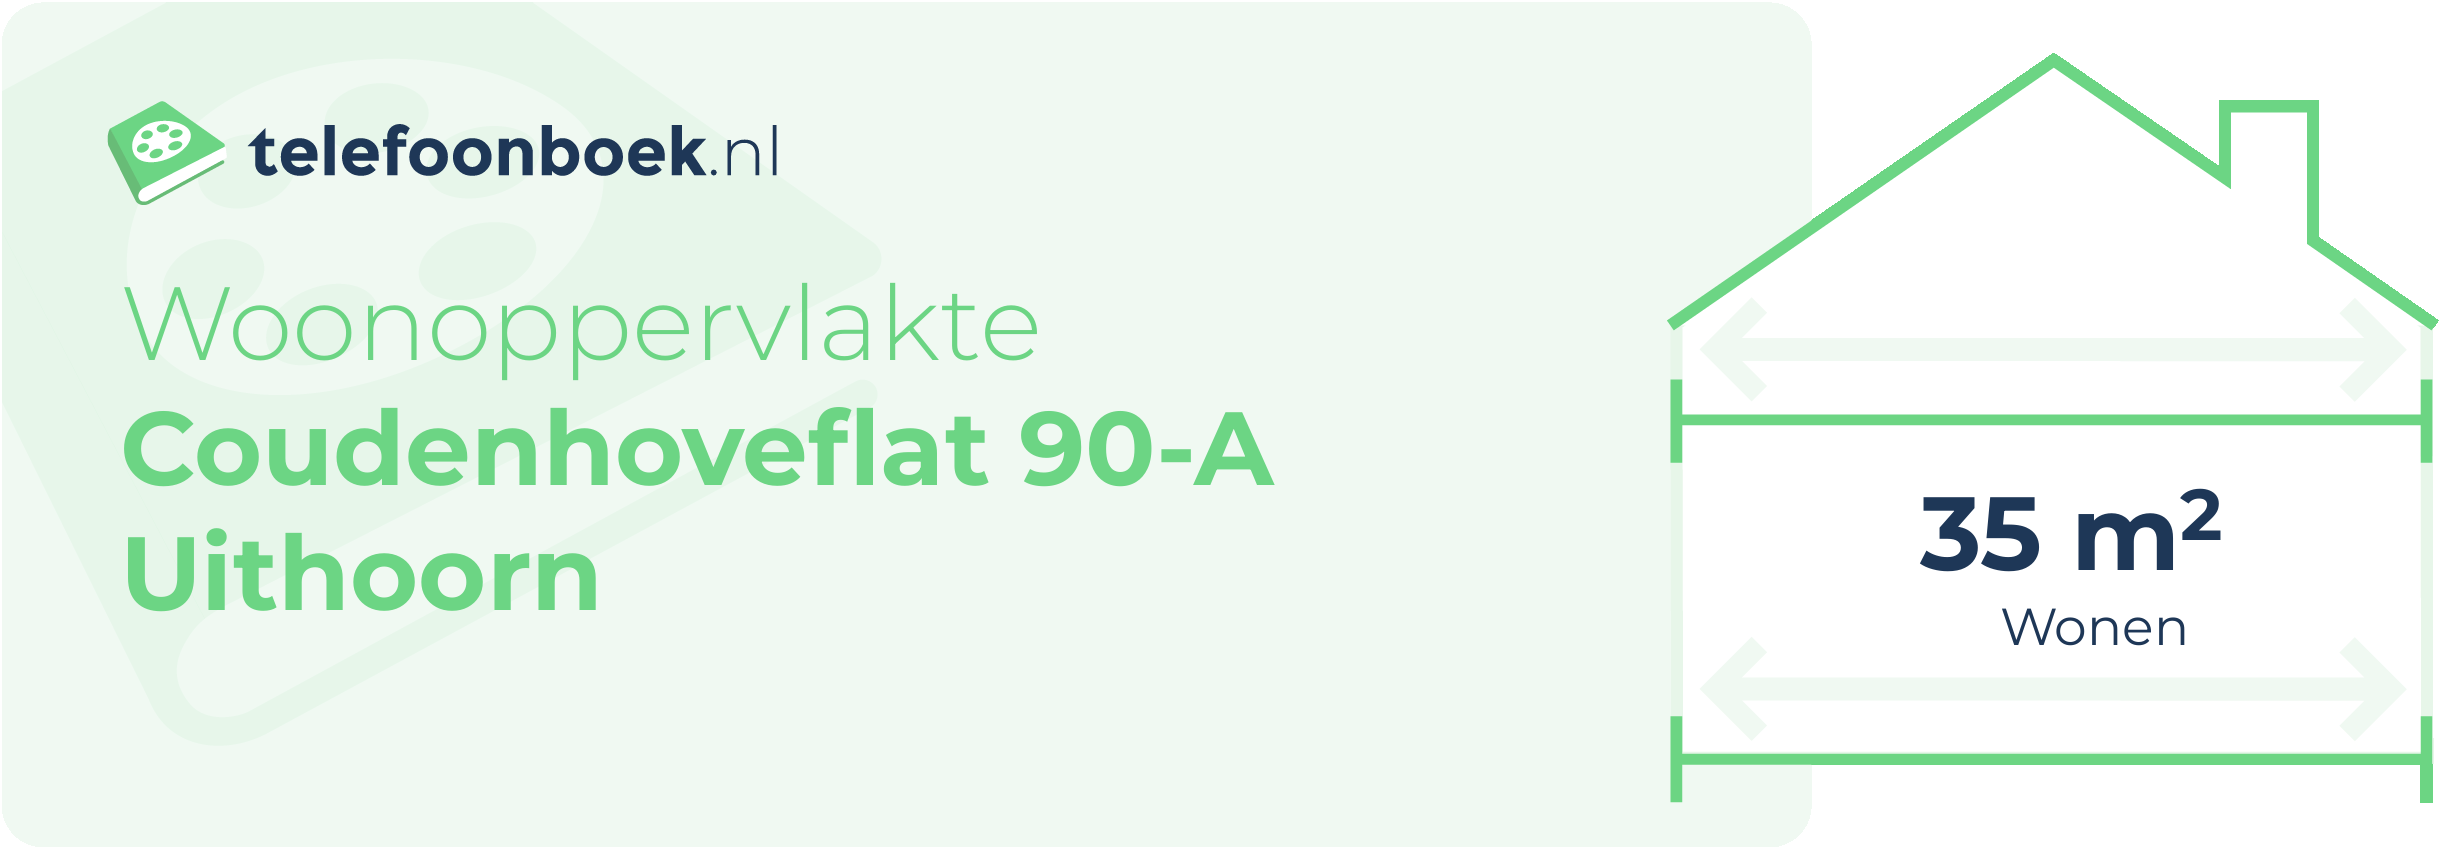 Woonoppervlakte Coudenhoveflat 90-A Uithoorn